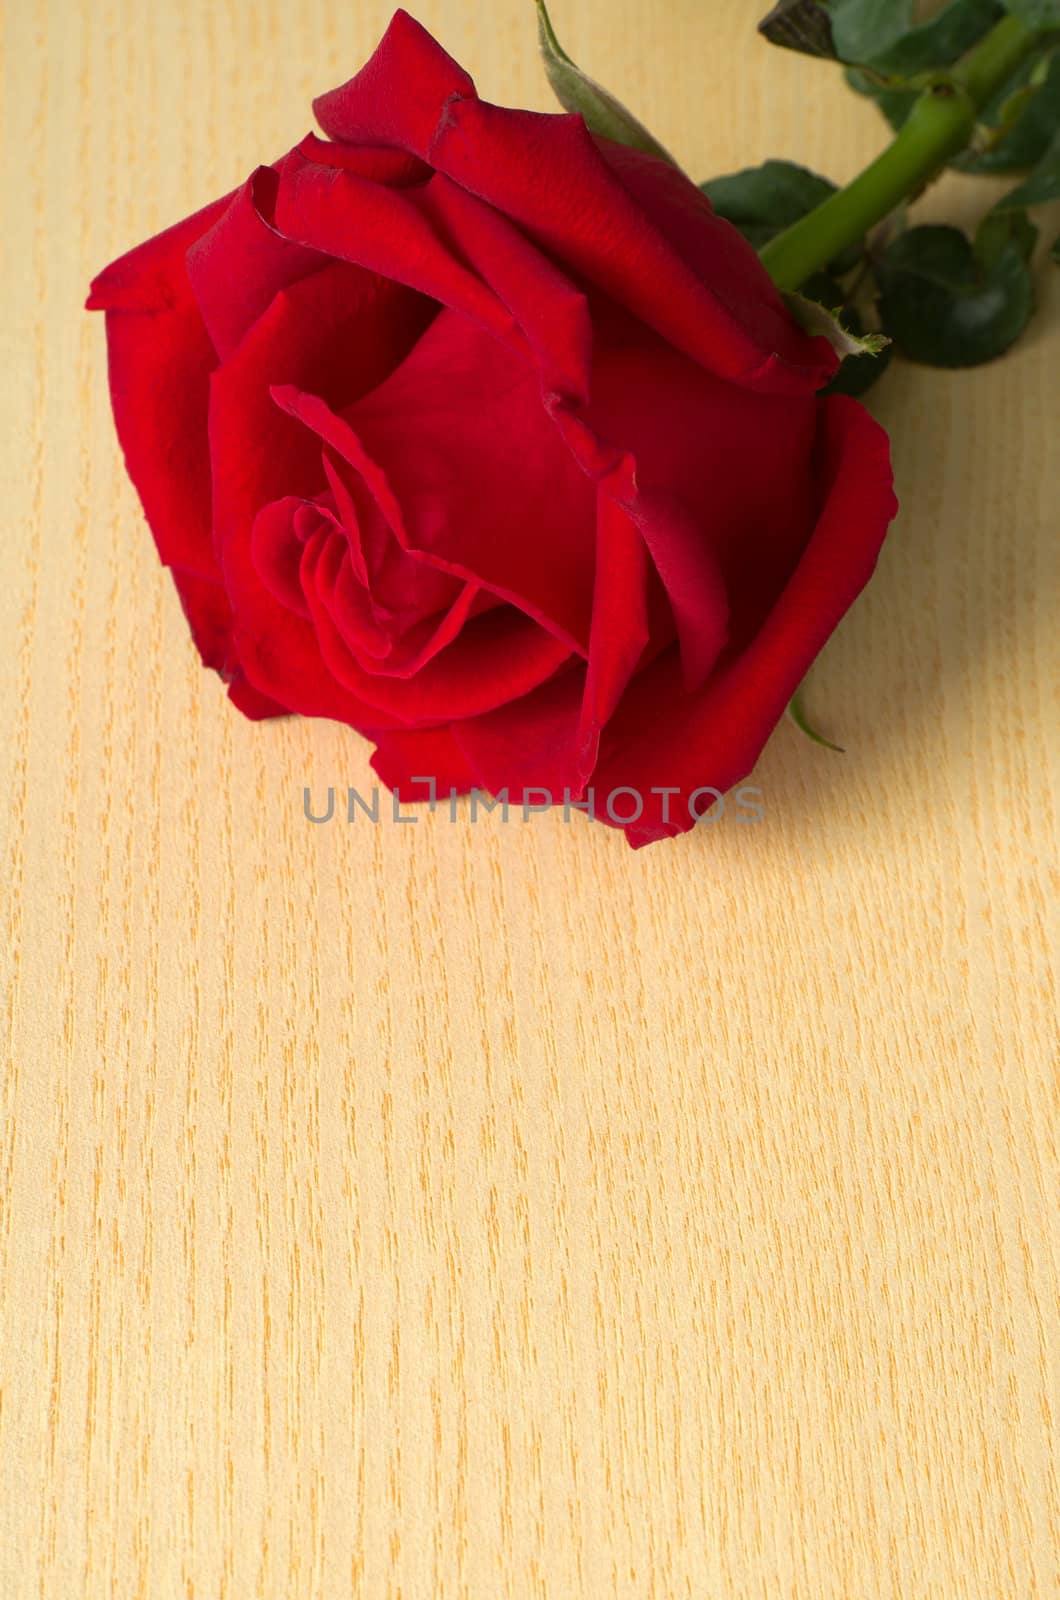 Red rose at top on wood table background